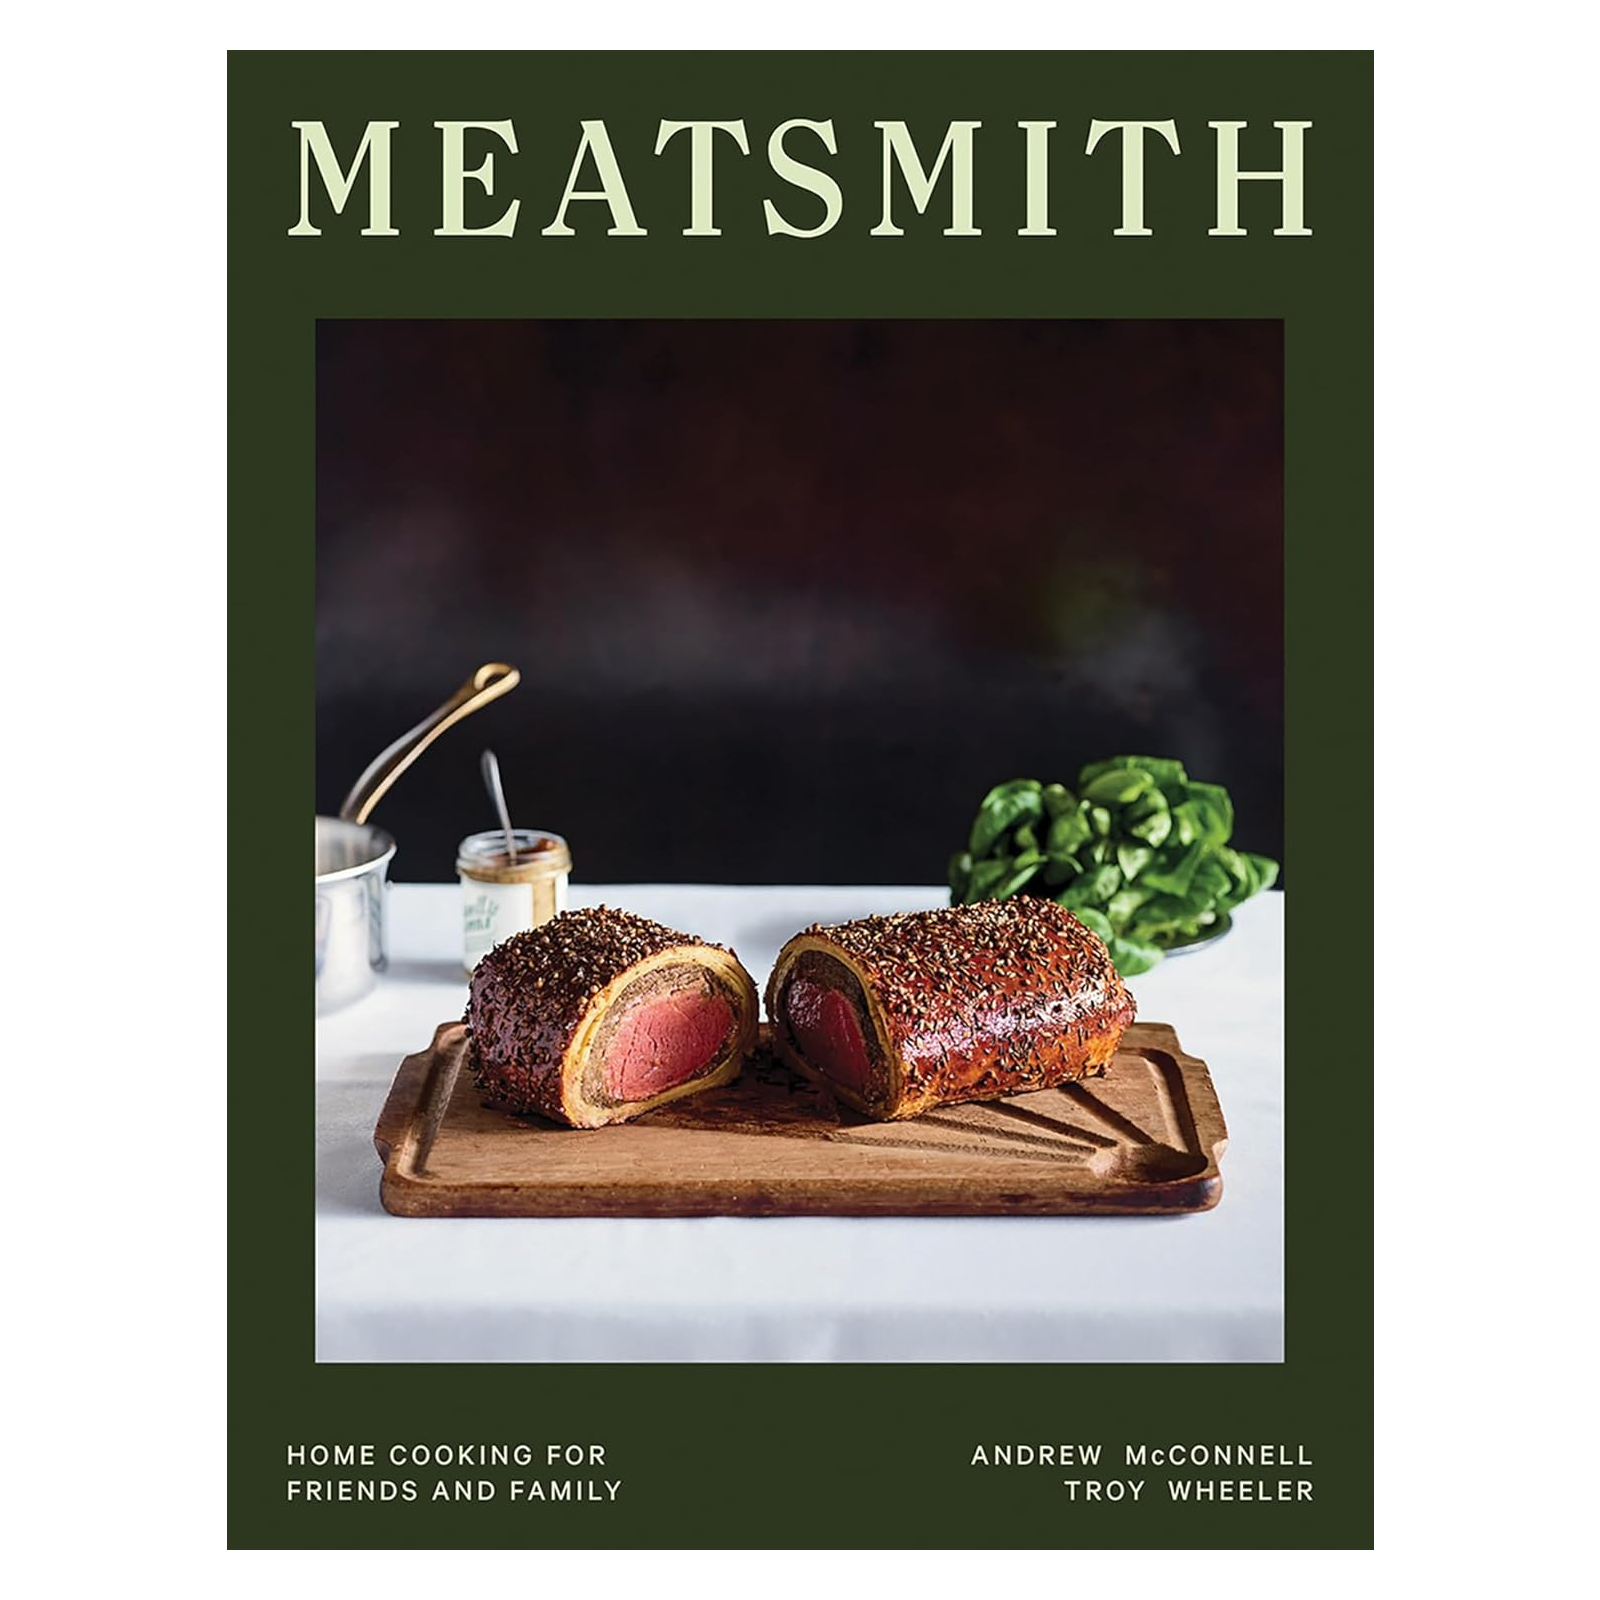 Meatsmith: Home Cooking For Friends And Family